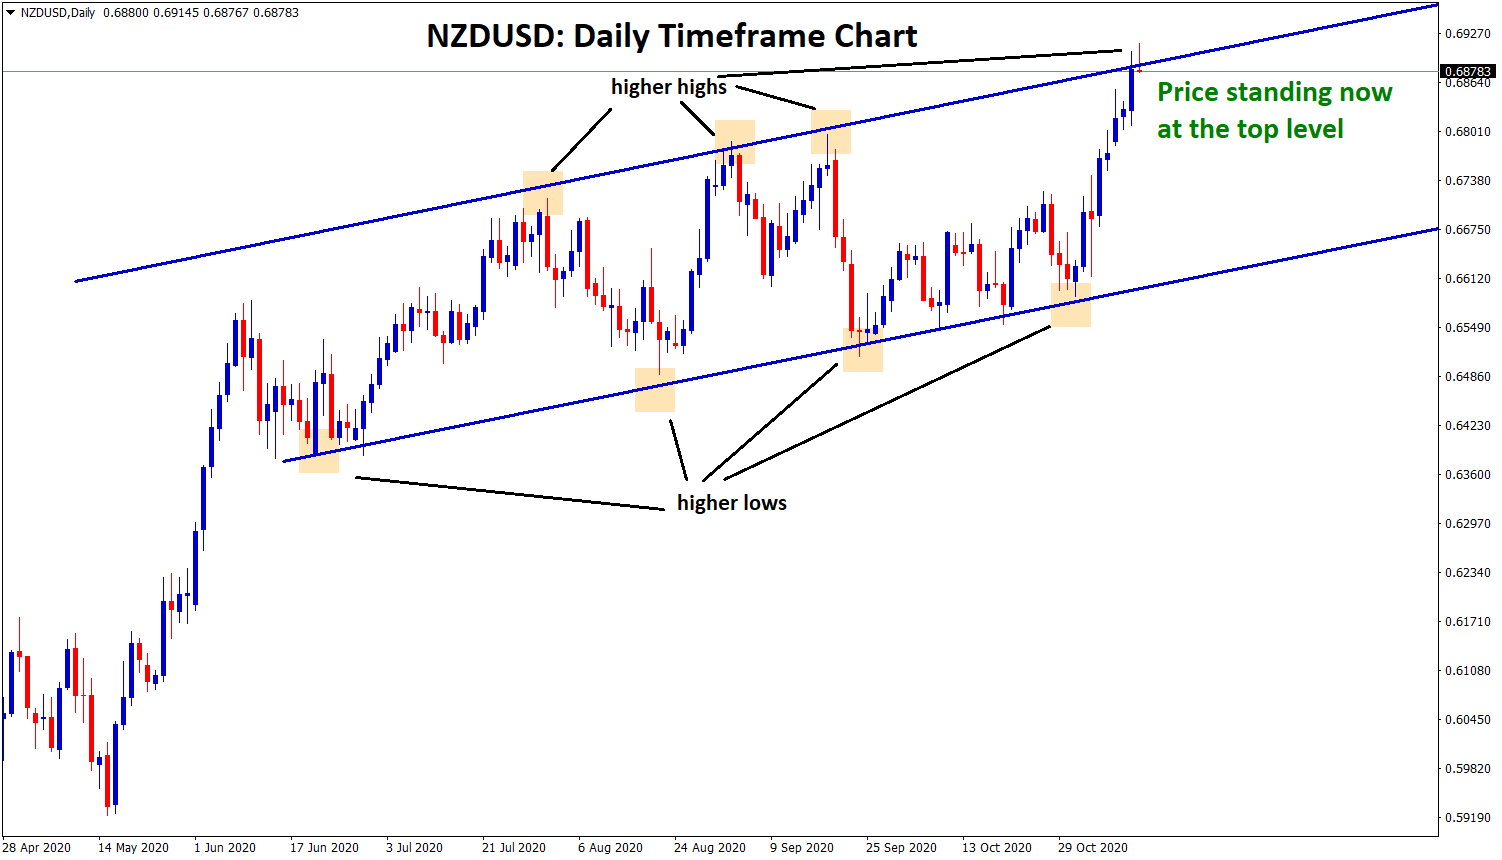 NZDUSD standing now at the top of the uptrend line